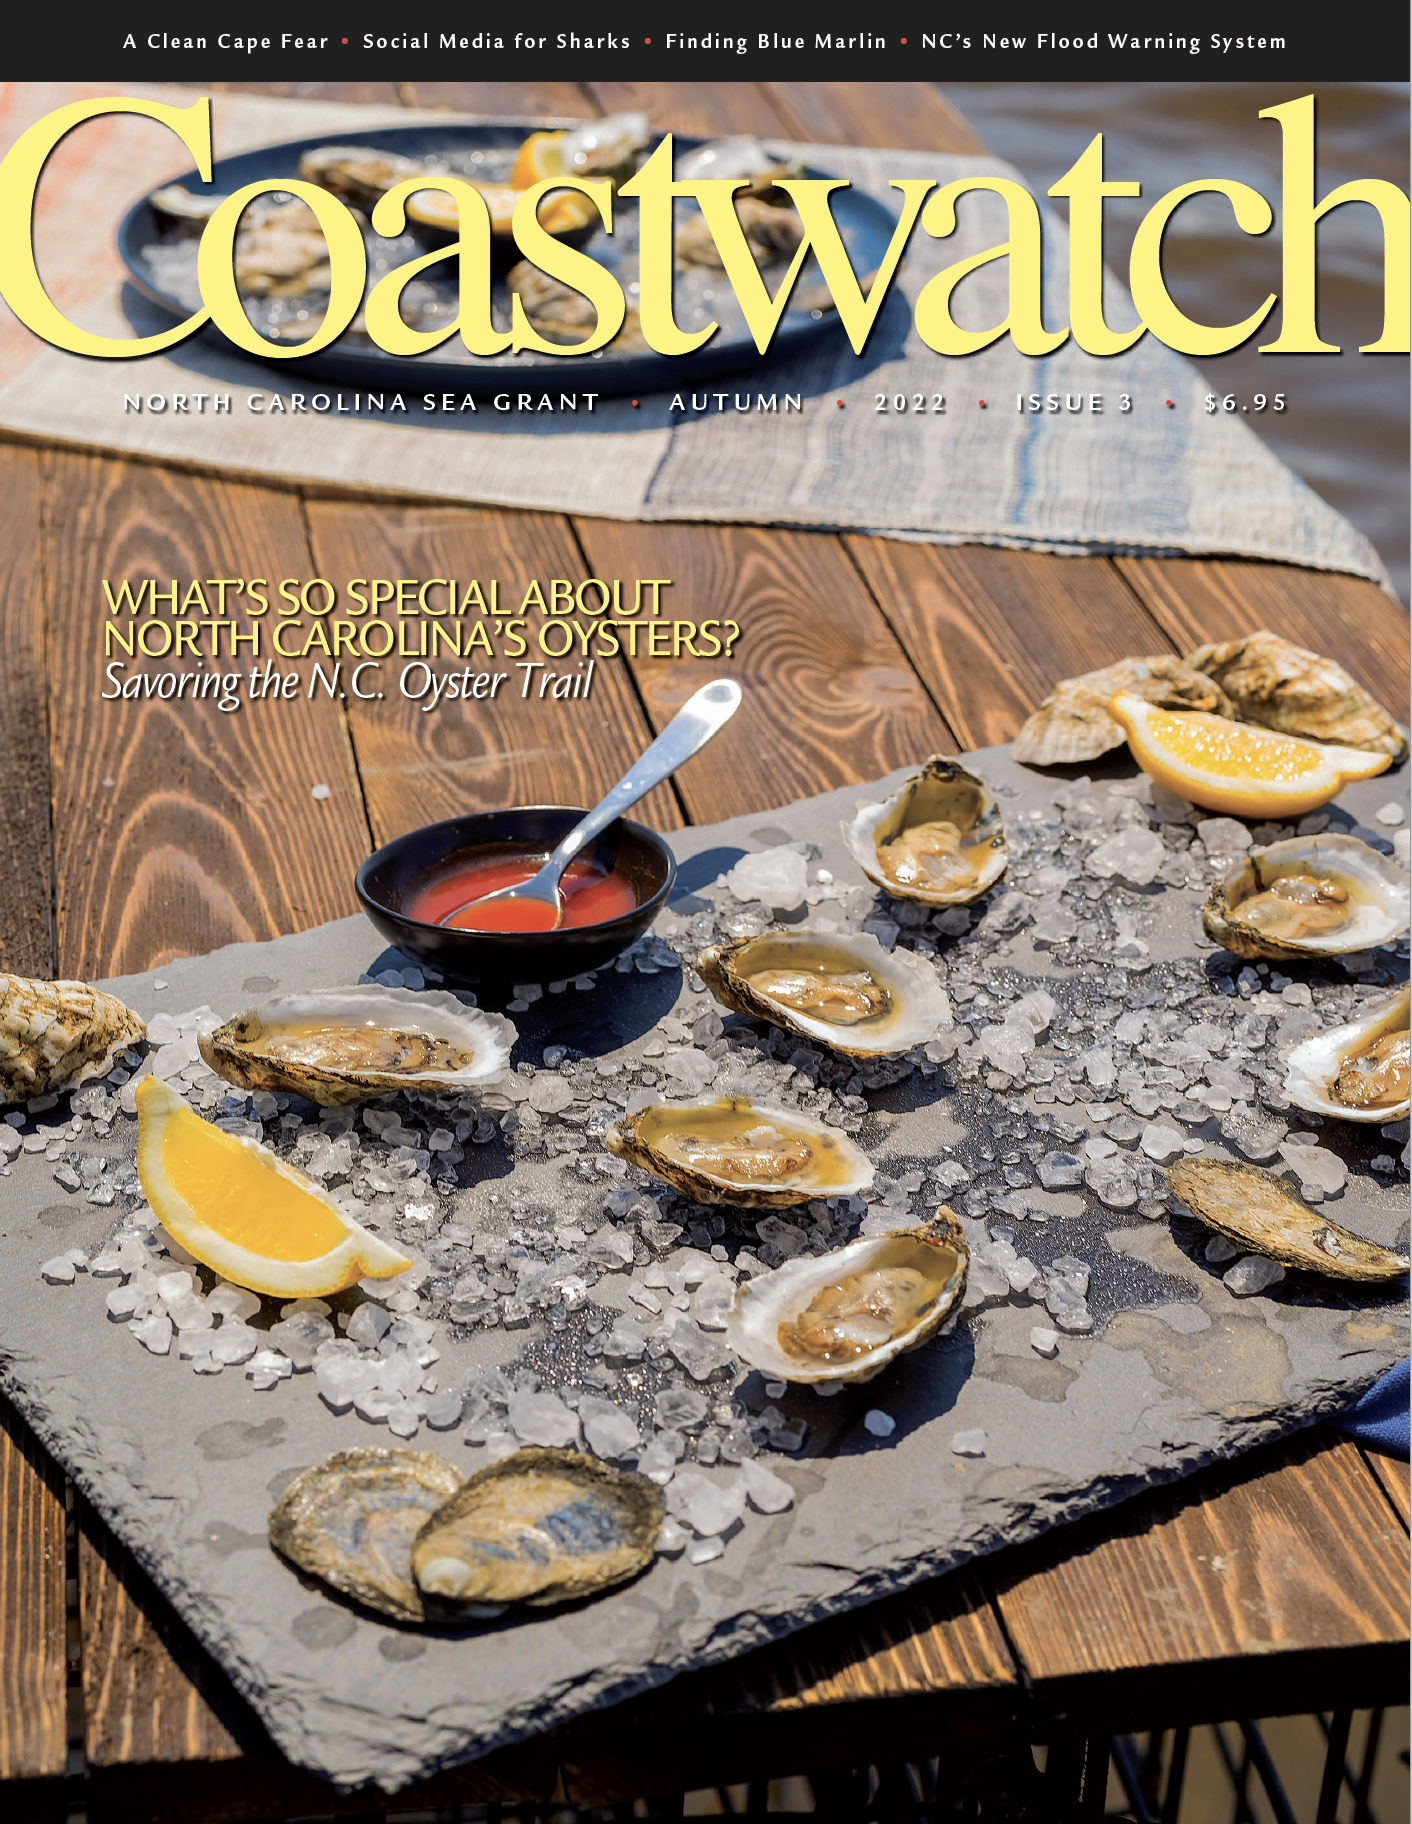 image: oyster spread on the Coastwatch Fall 2022 cover